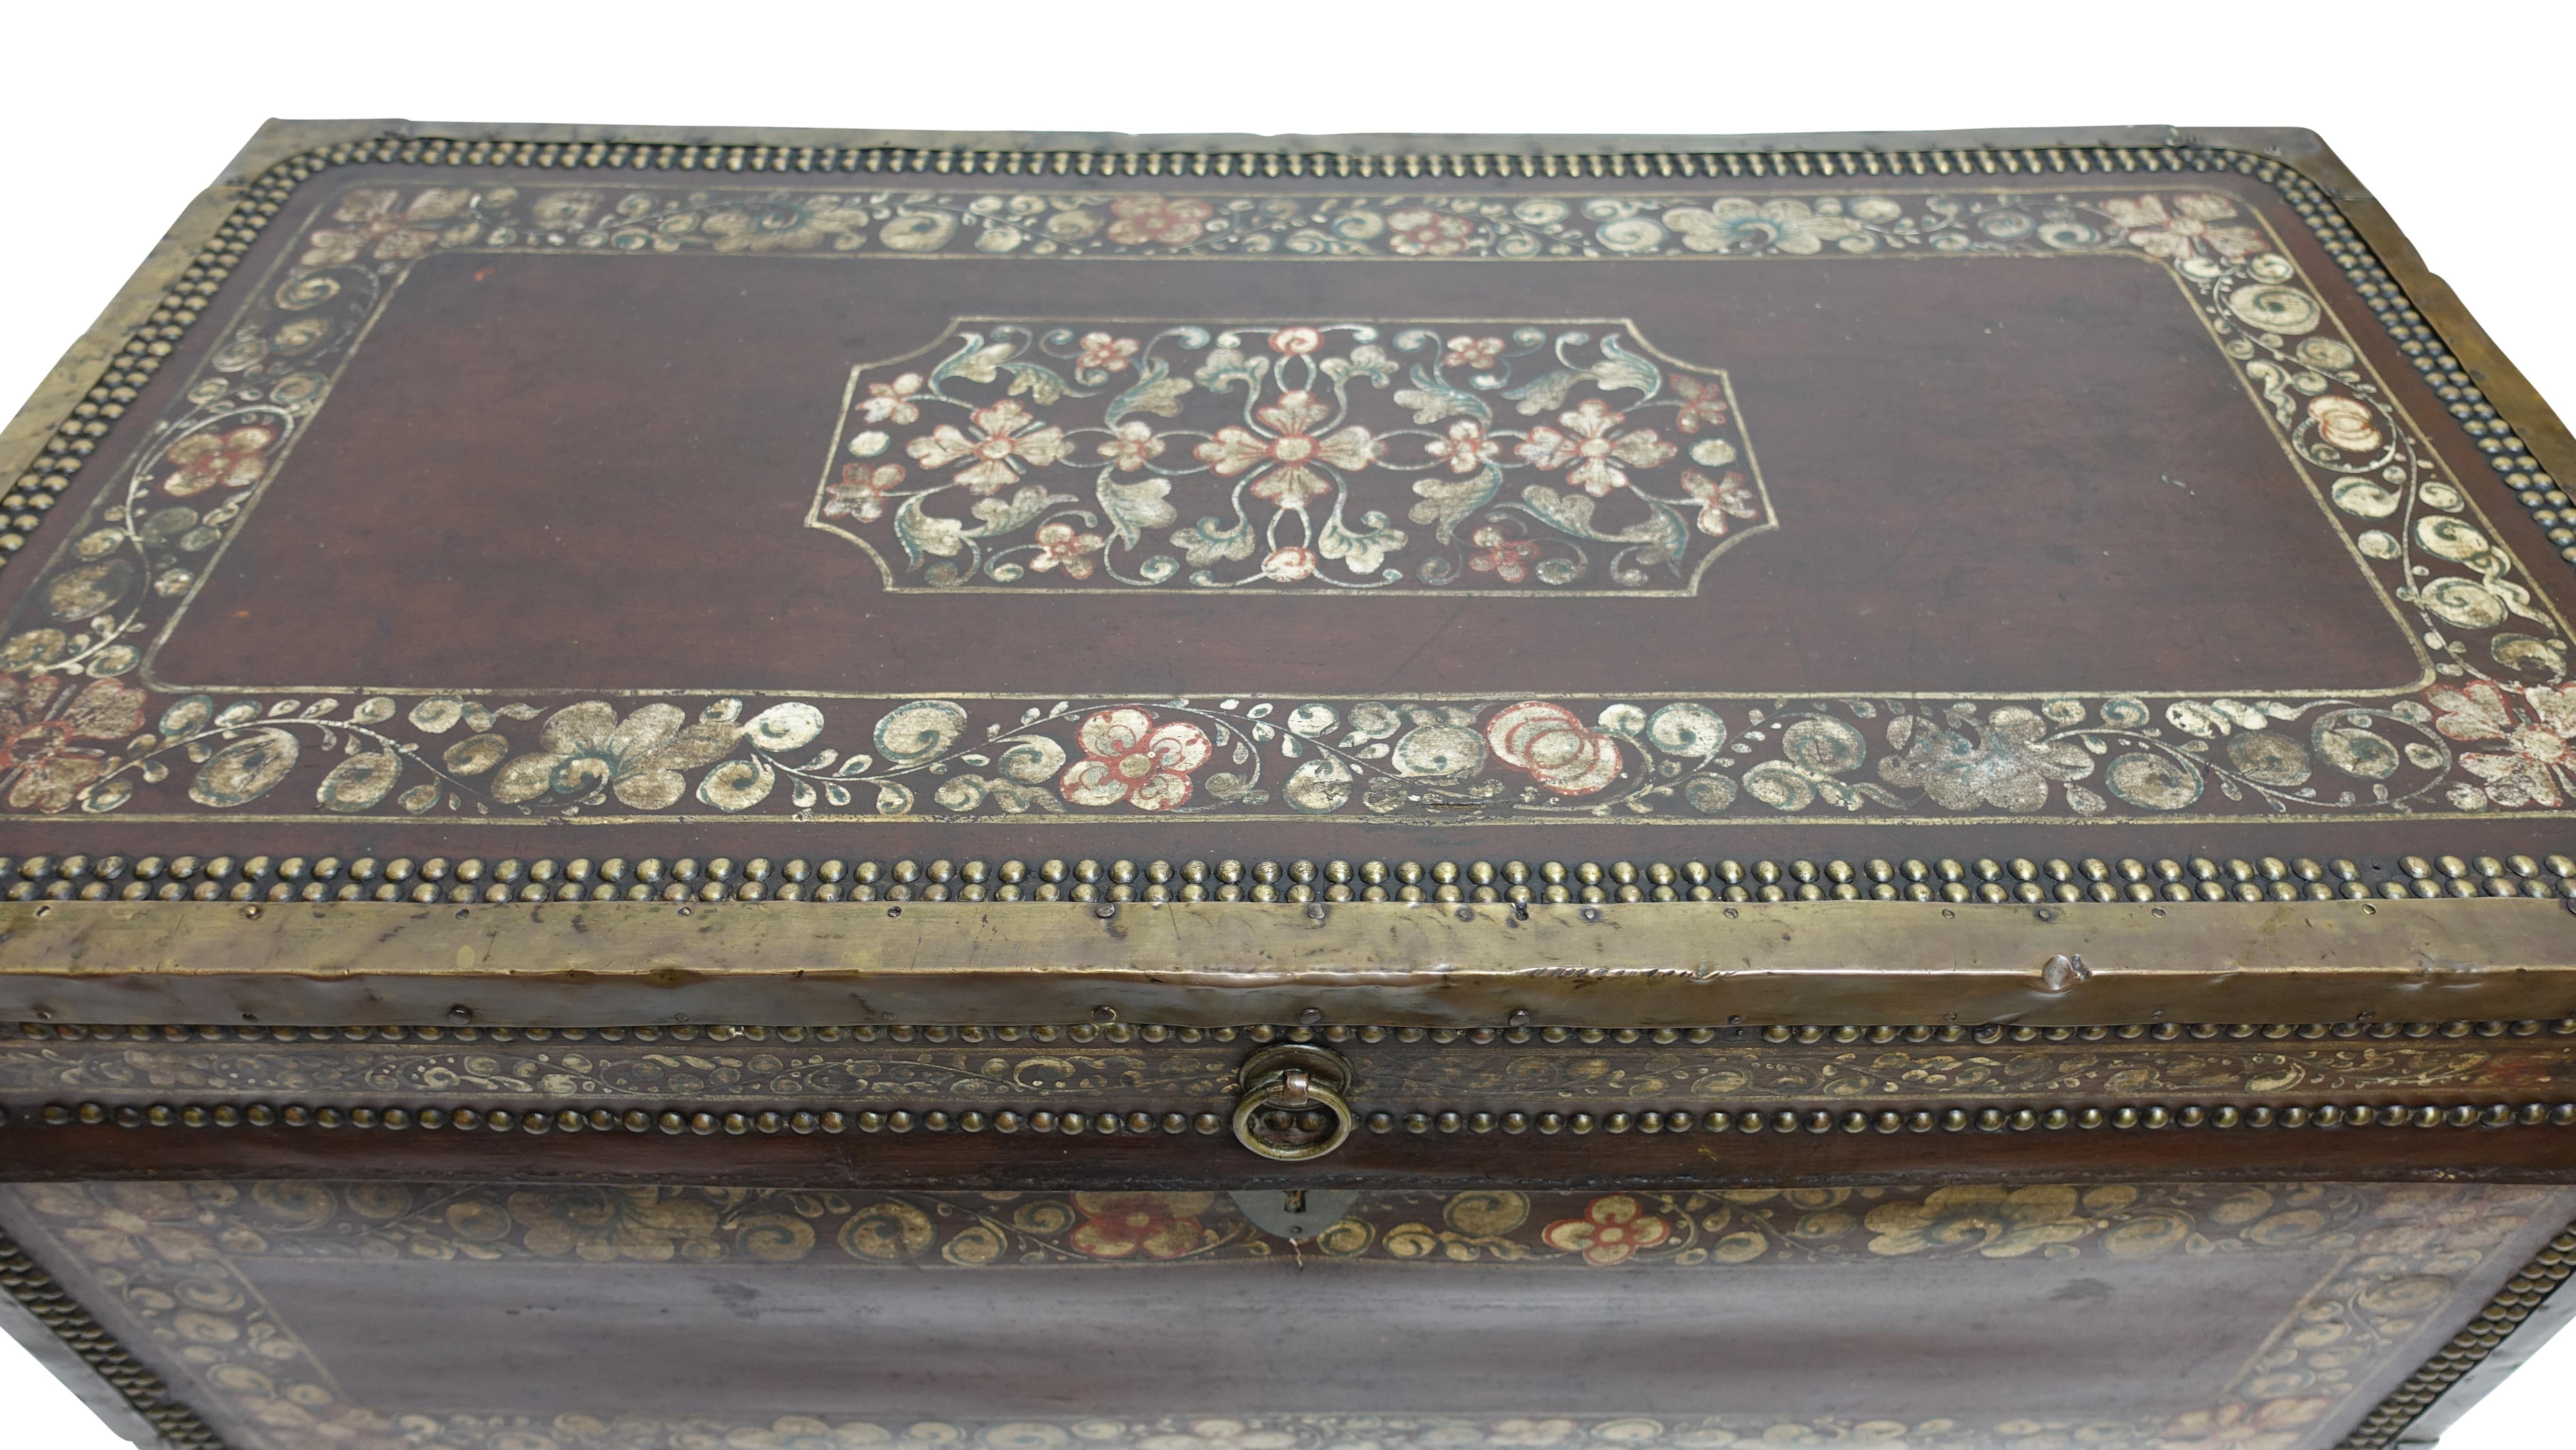 Hand-painted pigskin leather covered camphor wood trunk with metal nailhead and trim detail. China, mid to late 19th century.